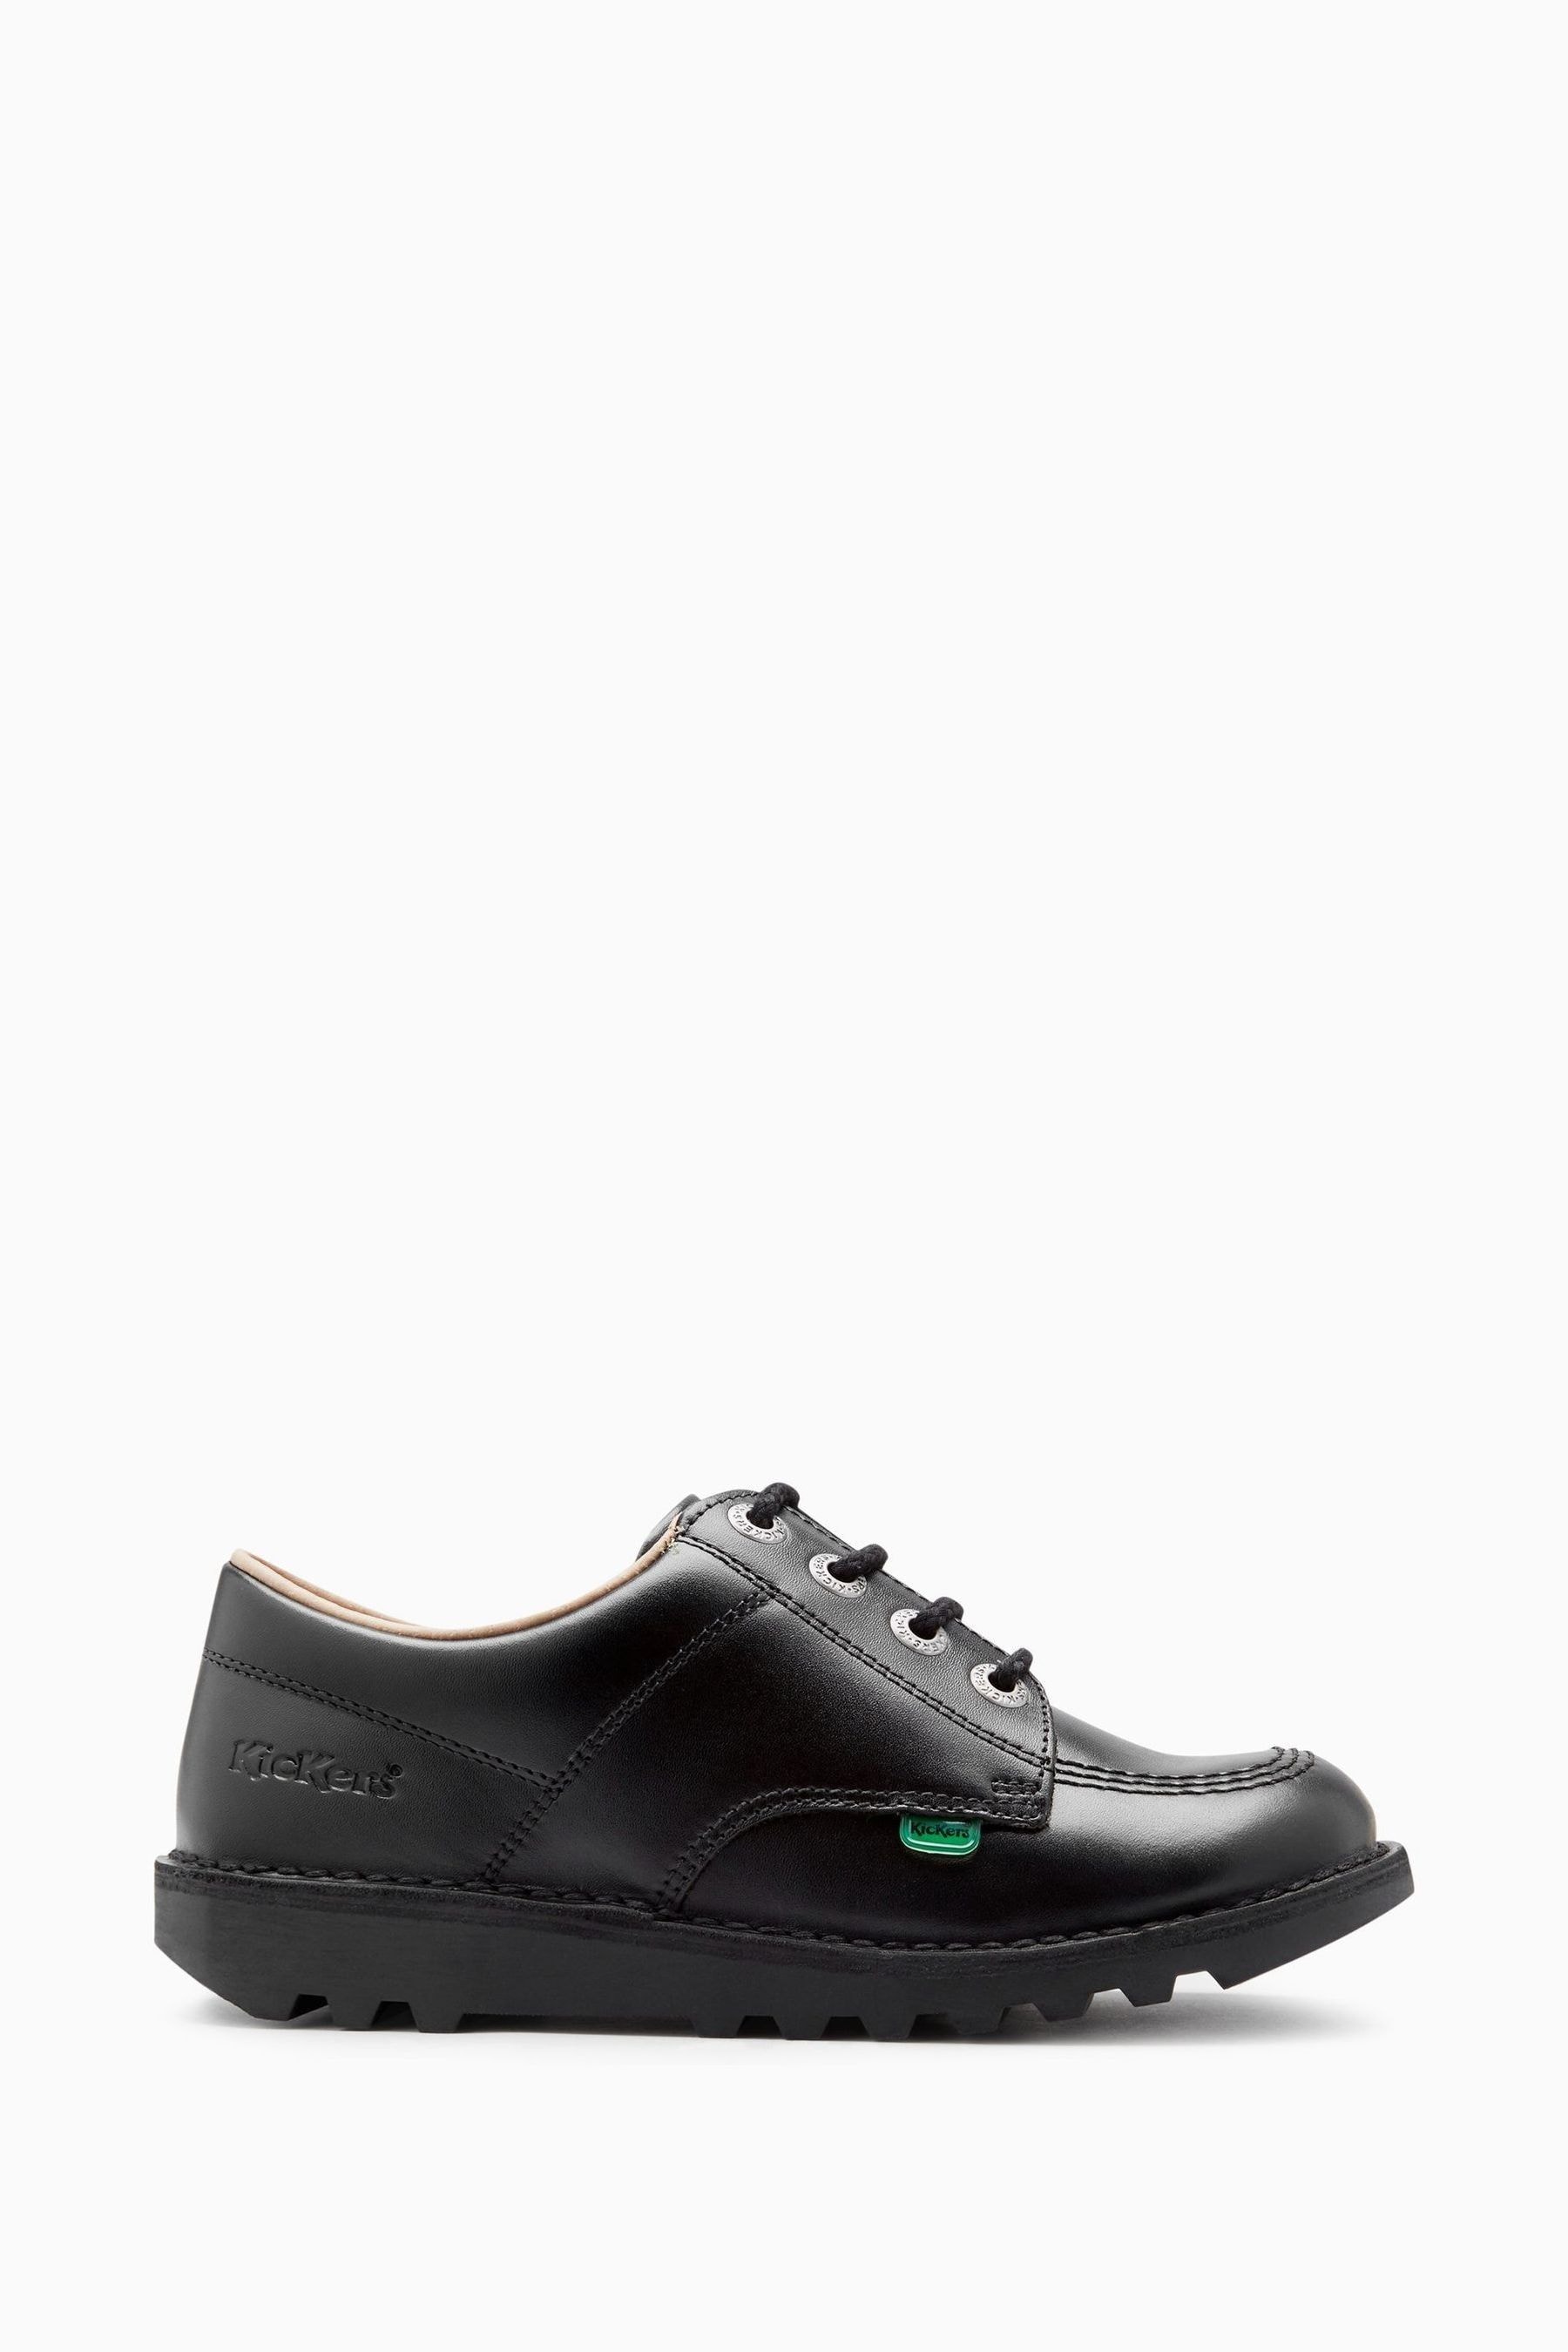 Buy Kickers Youth Kick Lo Leather Black Shoes from the Next UK online shop